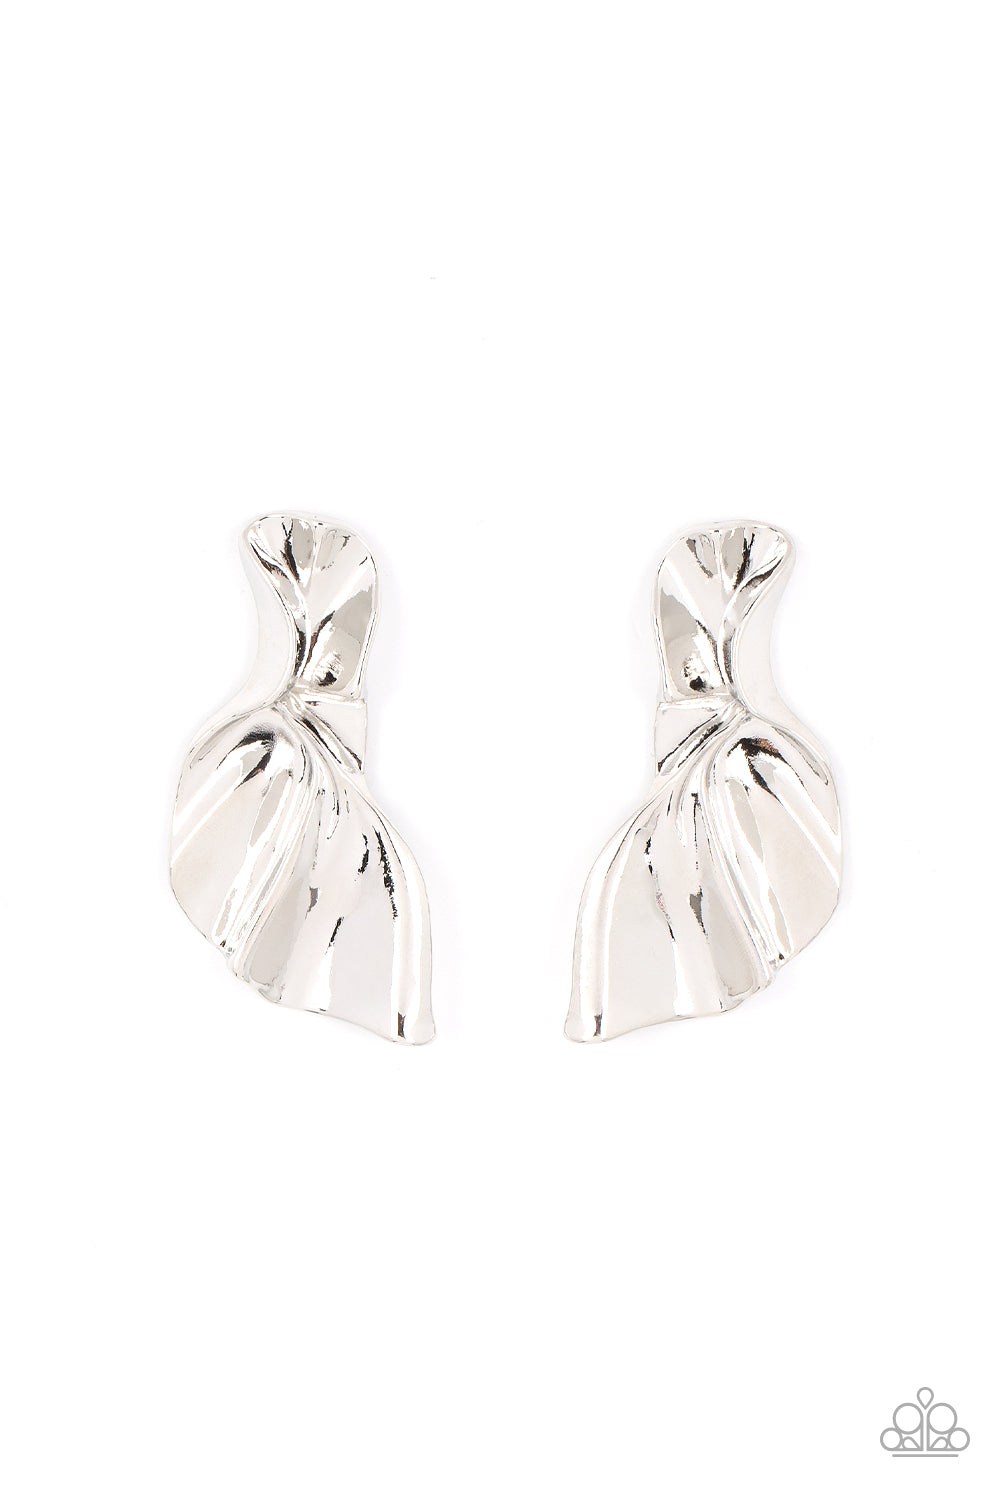 Paparazzi METAL-Physical Mood - Silver Earrings an oversized silver plate curls and ripples into an asymmetrical frame, resulting in a dramatic industrial display. Earring attaches to a standard post fitting.  Sold as one pair of post earrings.